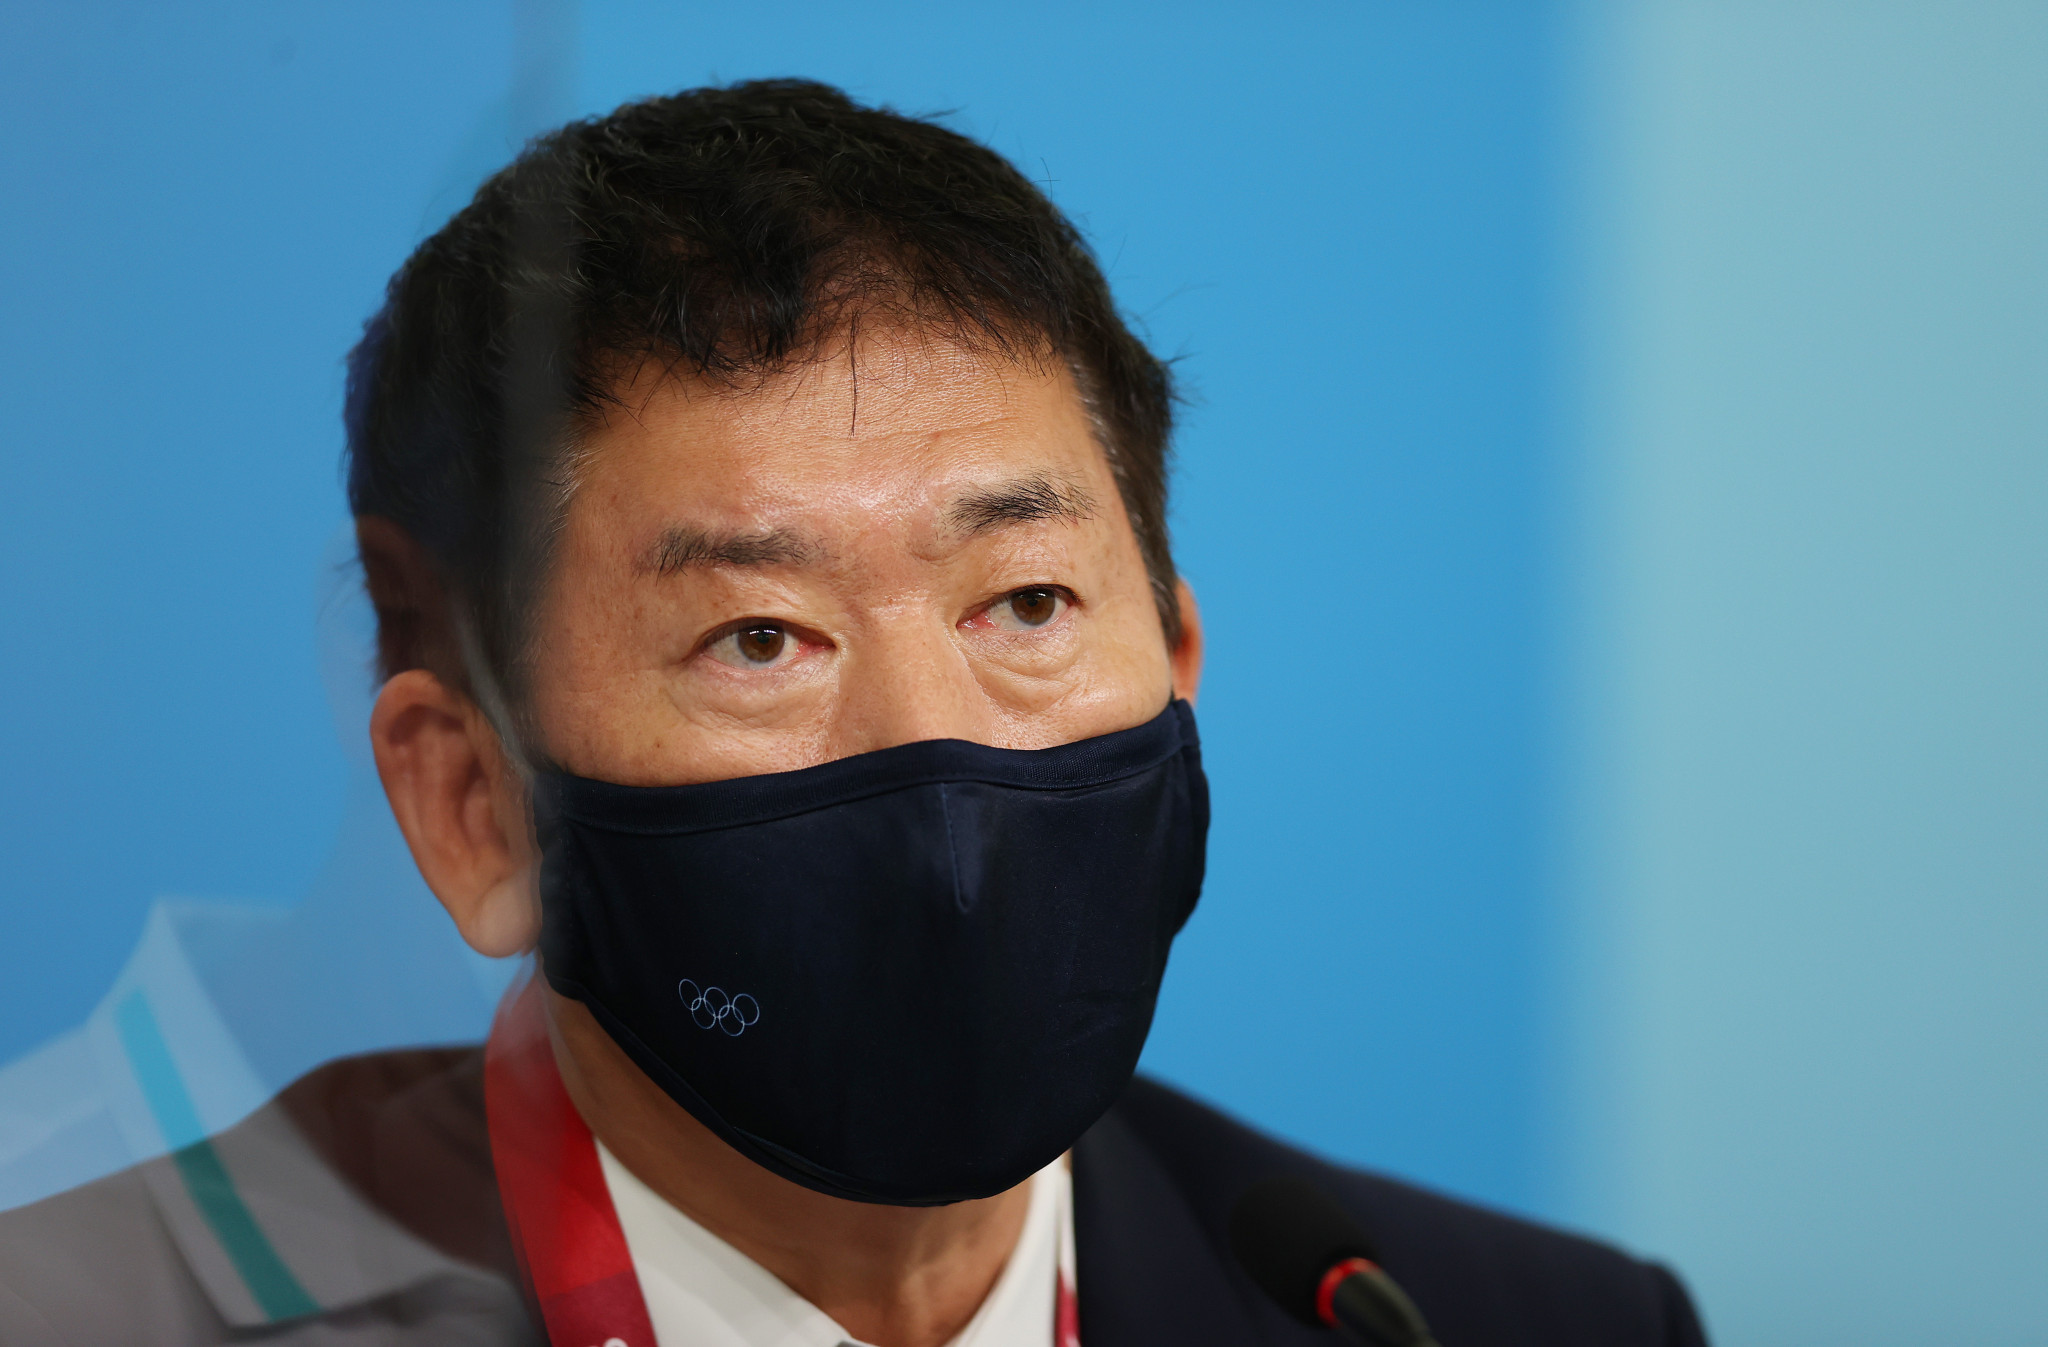 Morinari Watanabe has been re-elected as President of the International Gymnastics Federation at the organisation's Congress in Antalya ©Getty Images